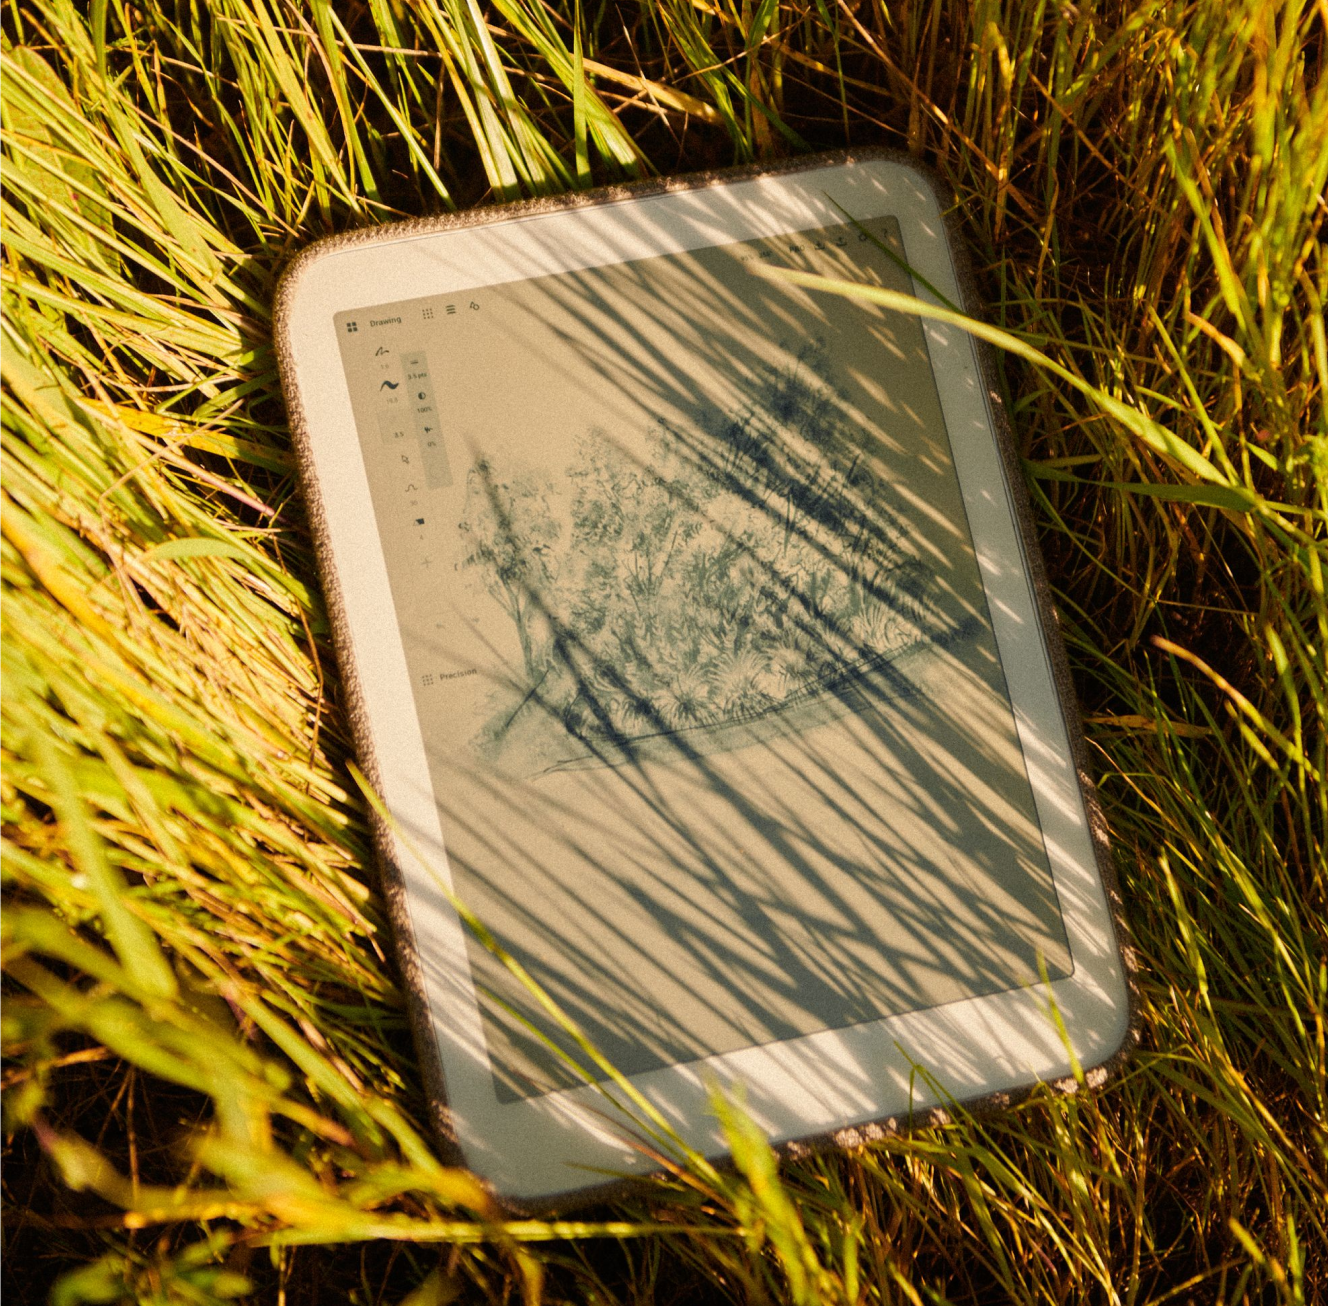 A Daylight tablet on the grass